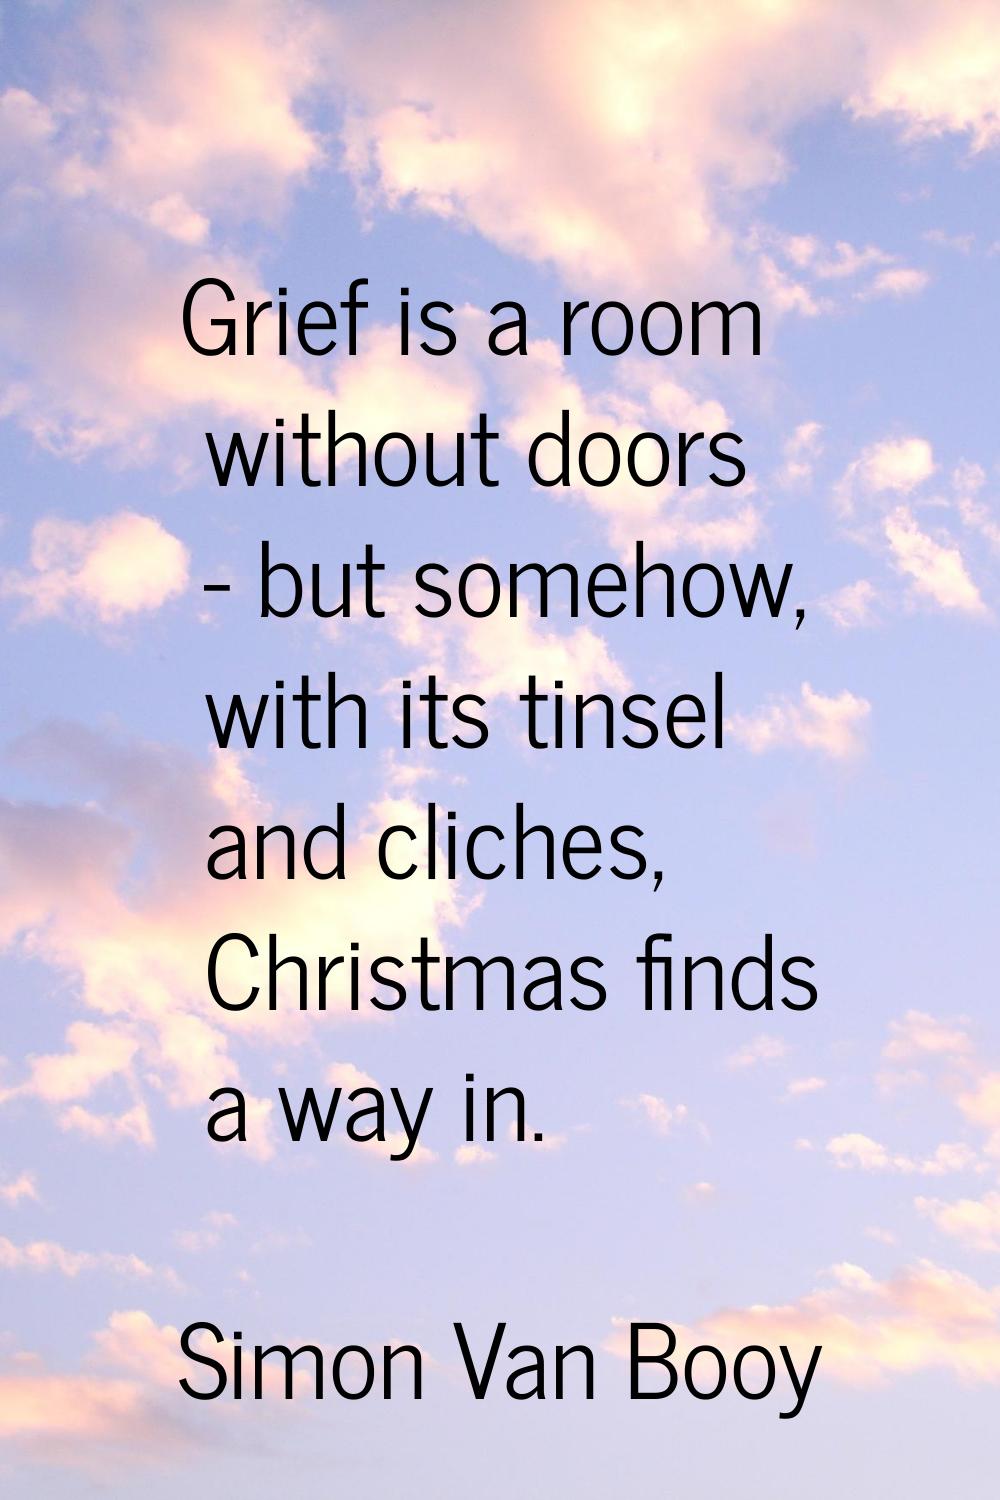 Grief is a room without doors - but somehow, with its tinsel and cliches, Christmas finds a way in.